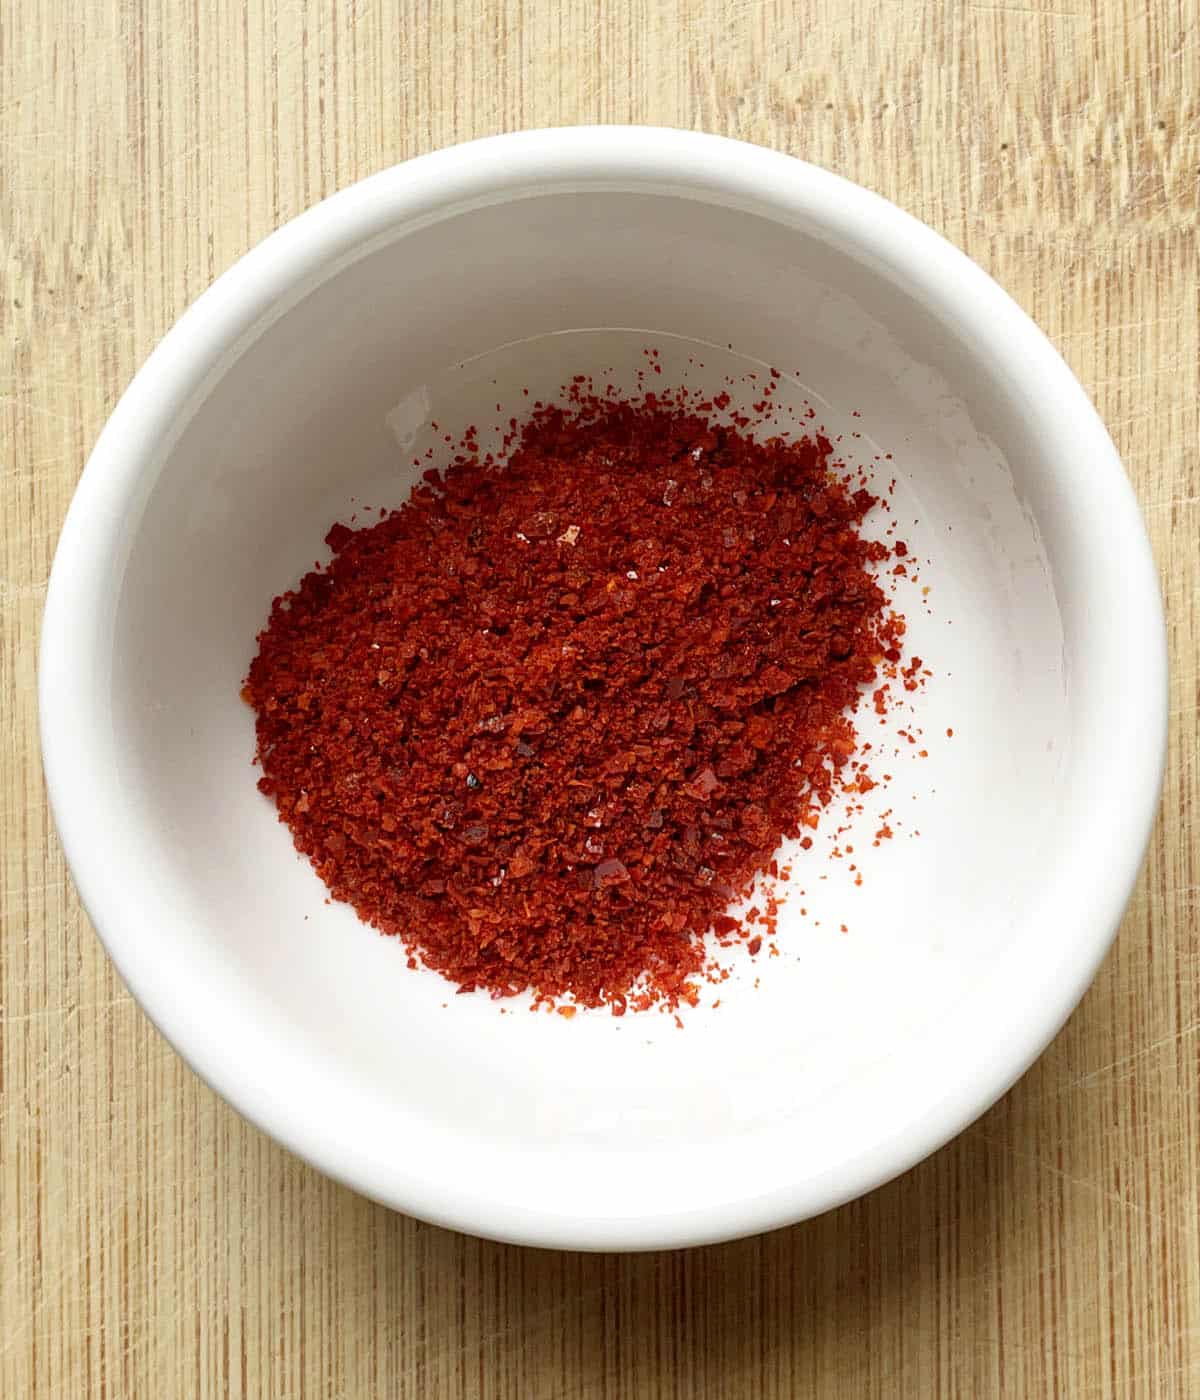 A round white dish containing red chili pepper flakes.